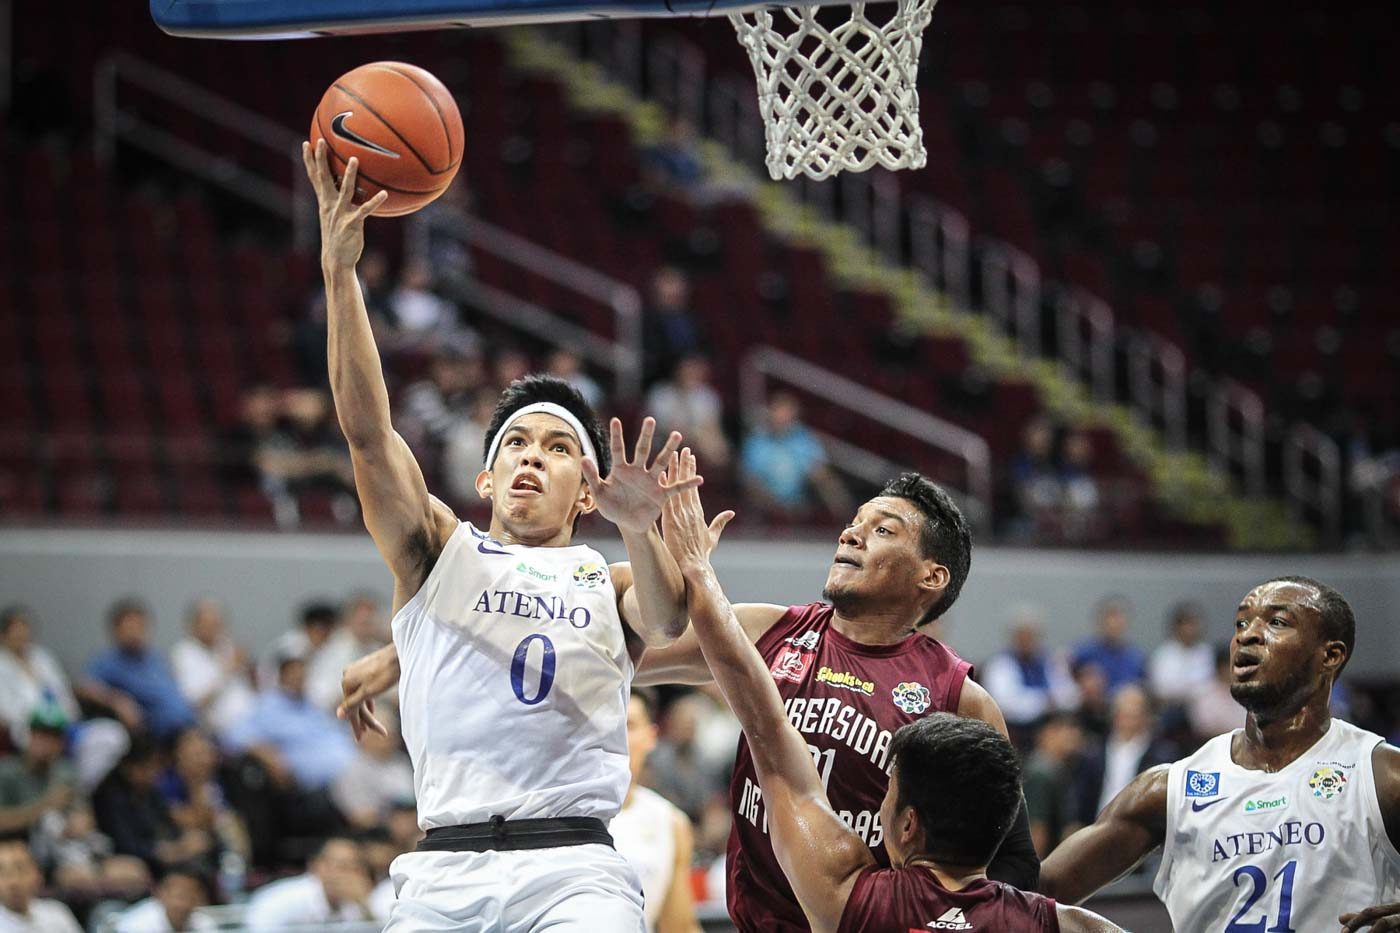 Ateneo Blue Eagles Season 80 team preview – Live in the moment, not the shadow